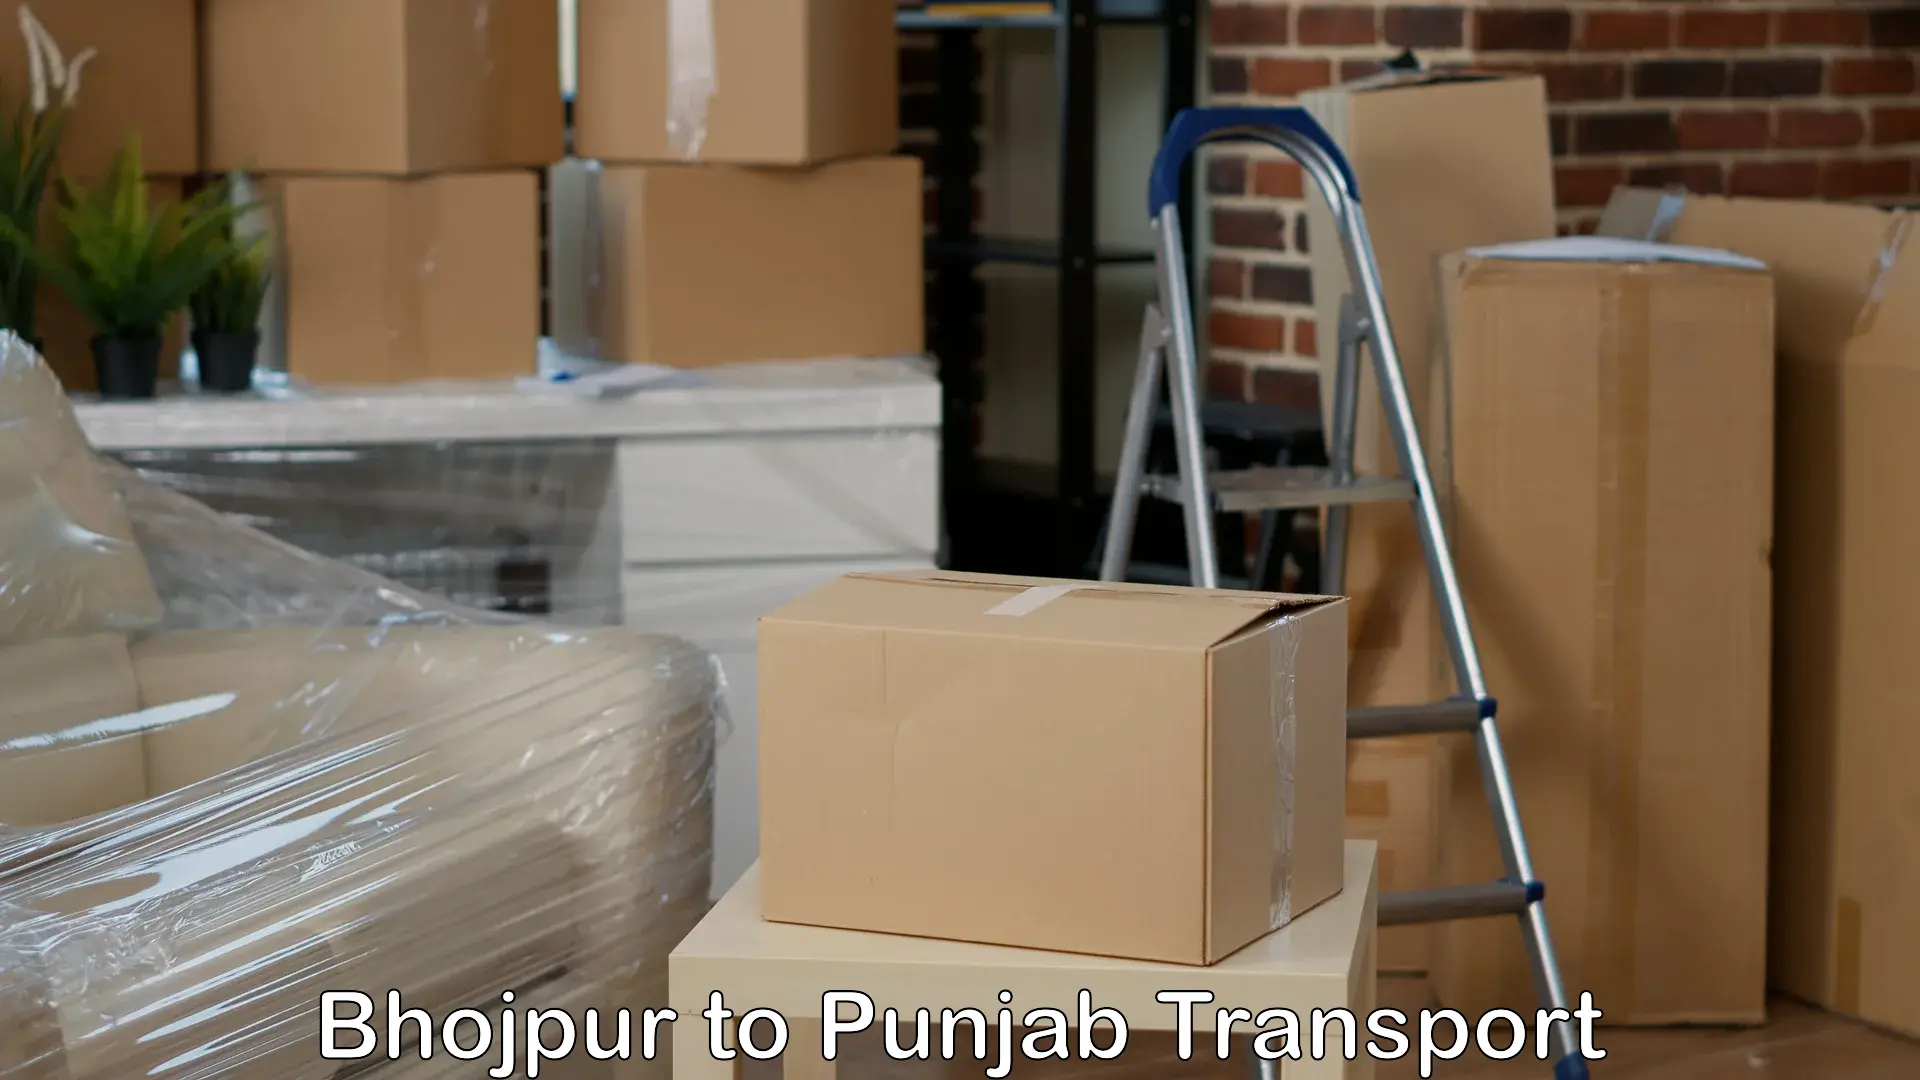 Goods delivery service Bhojpur to Dera Bassi